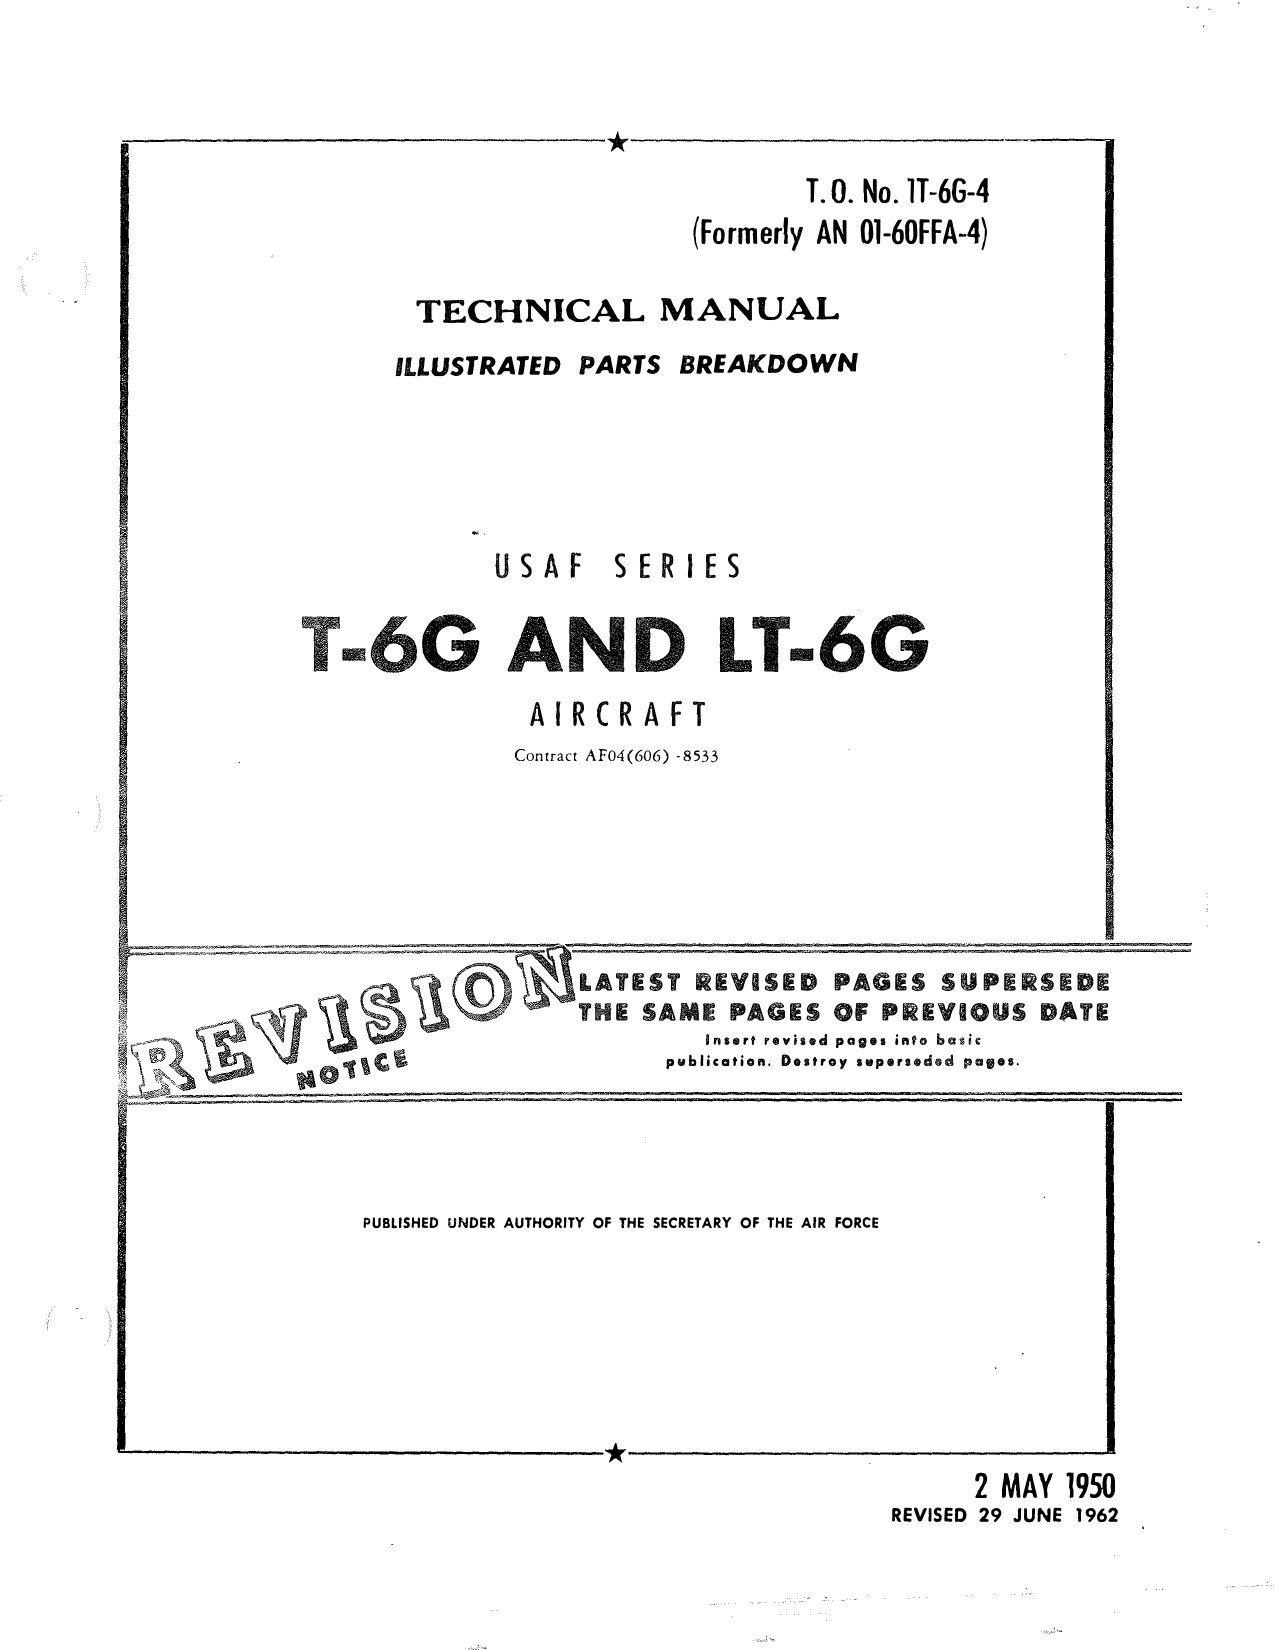 Sample page 1 from AirCorps Library document: Illustrated Parts Breakdown - T-6G & LT-6G